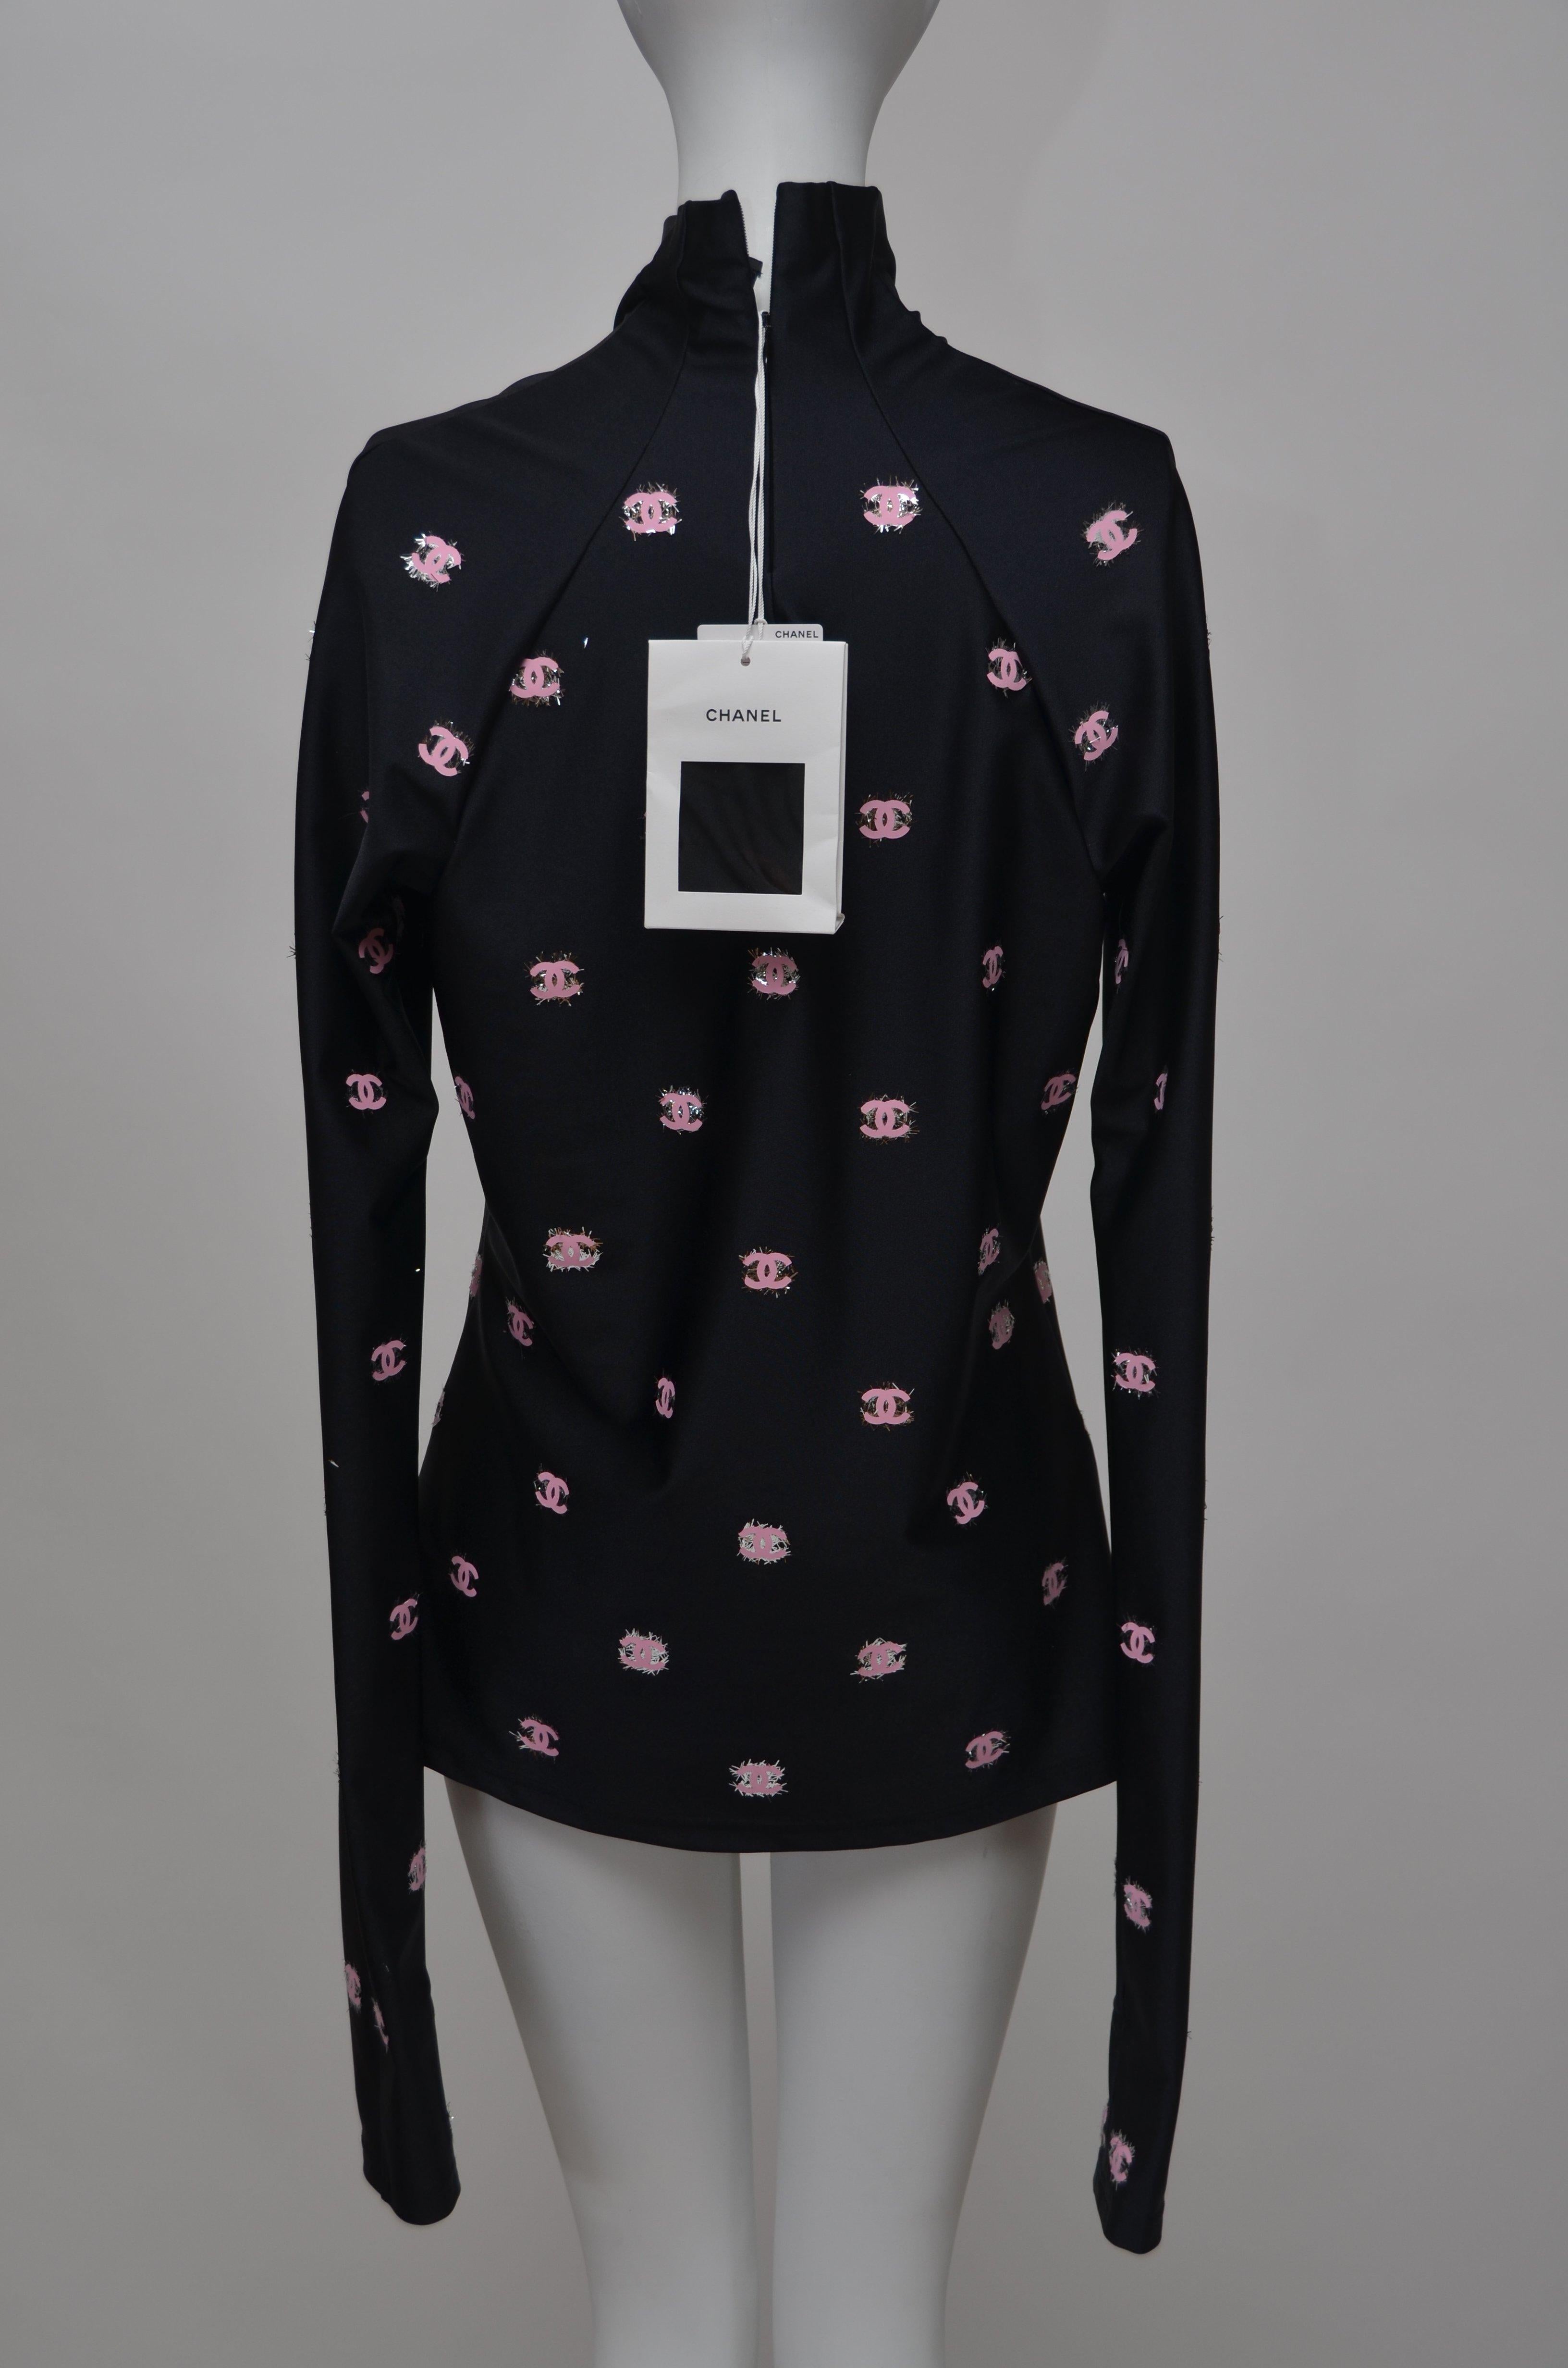 100% AUTHENTIC GUARANTEED  
CHANEL Black Stretch Top With Pink CC 
Long Sleeve   
Bottom of the sleeve have hole for your thumb, very cool
Zipper closure on the back, fabric is light stretchy
SZ 42  
NEW With tags

FINAL SALE